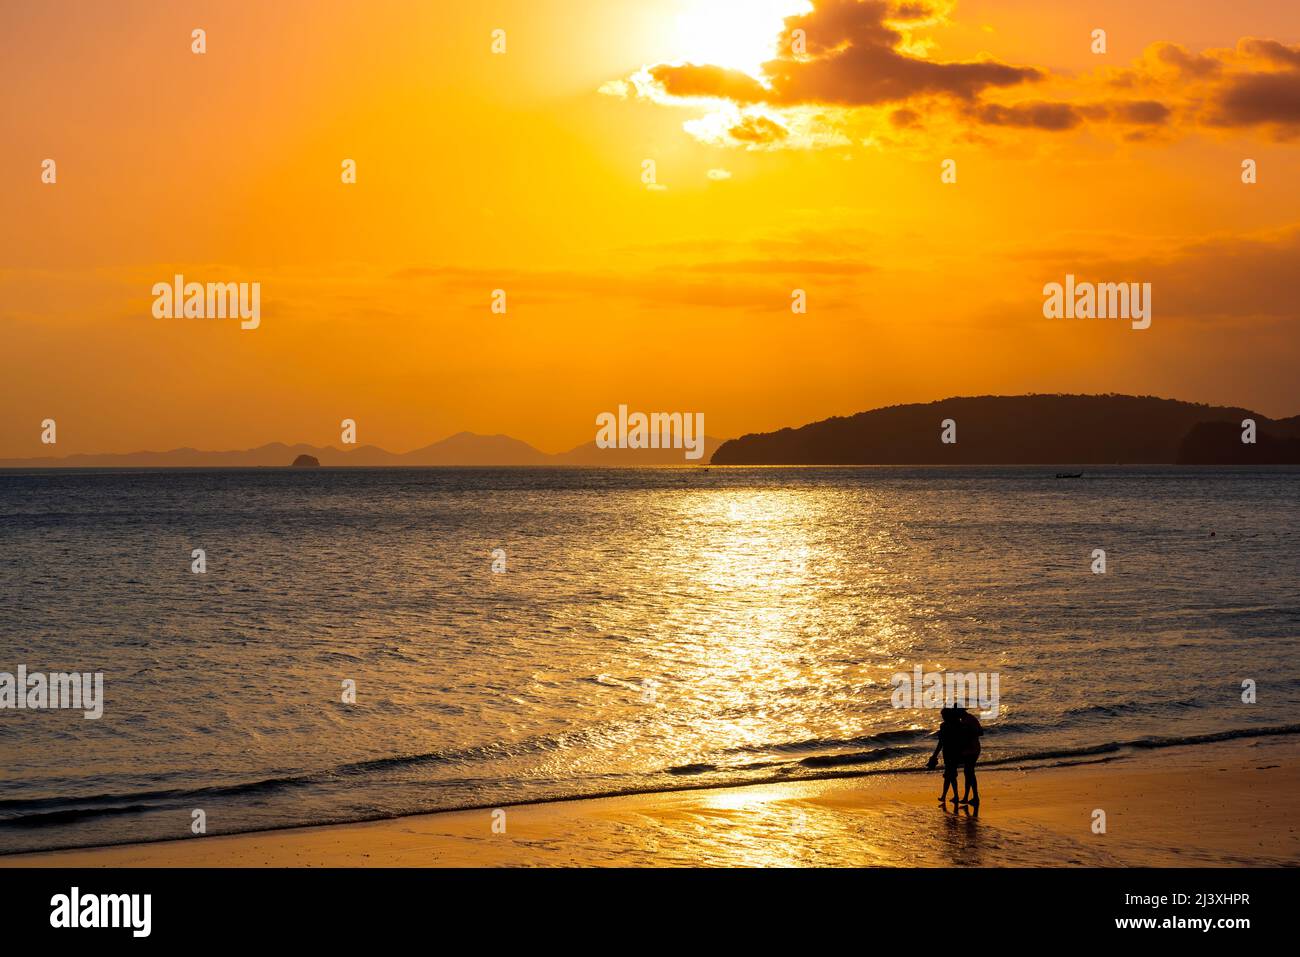 Relaxing sea sunset and romantic couple silhouettes walking on the beach in golden sunlight. Stock Photo